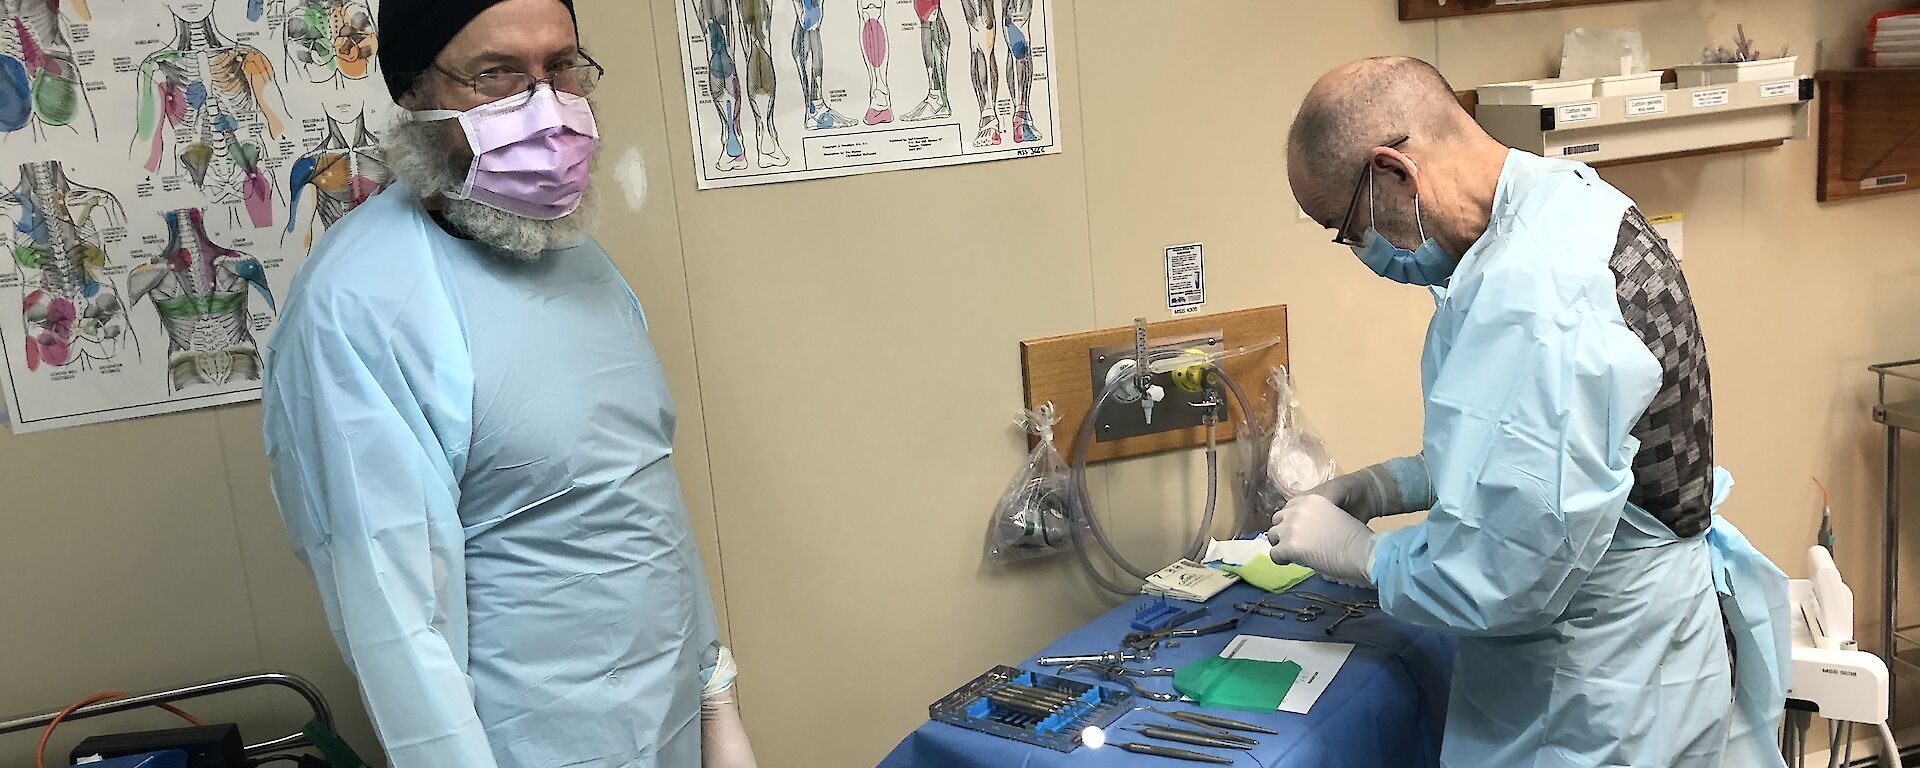 Two men in scrubs and face masks prepare the dentistry equipment in the medical room